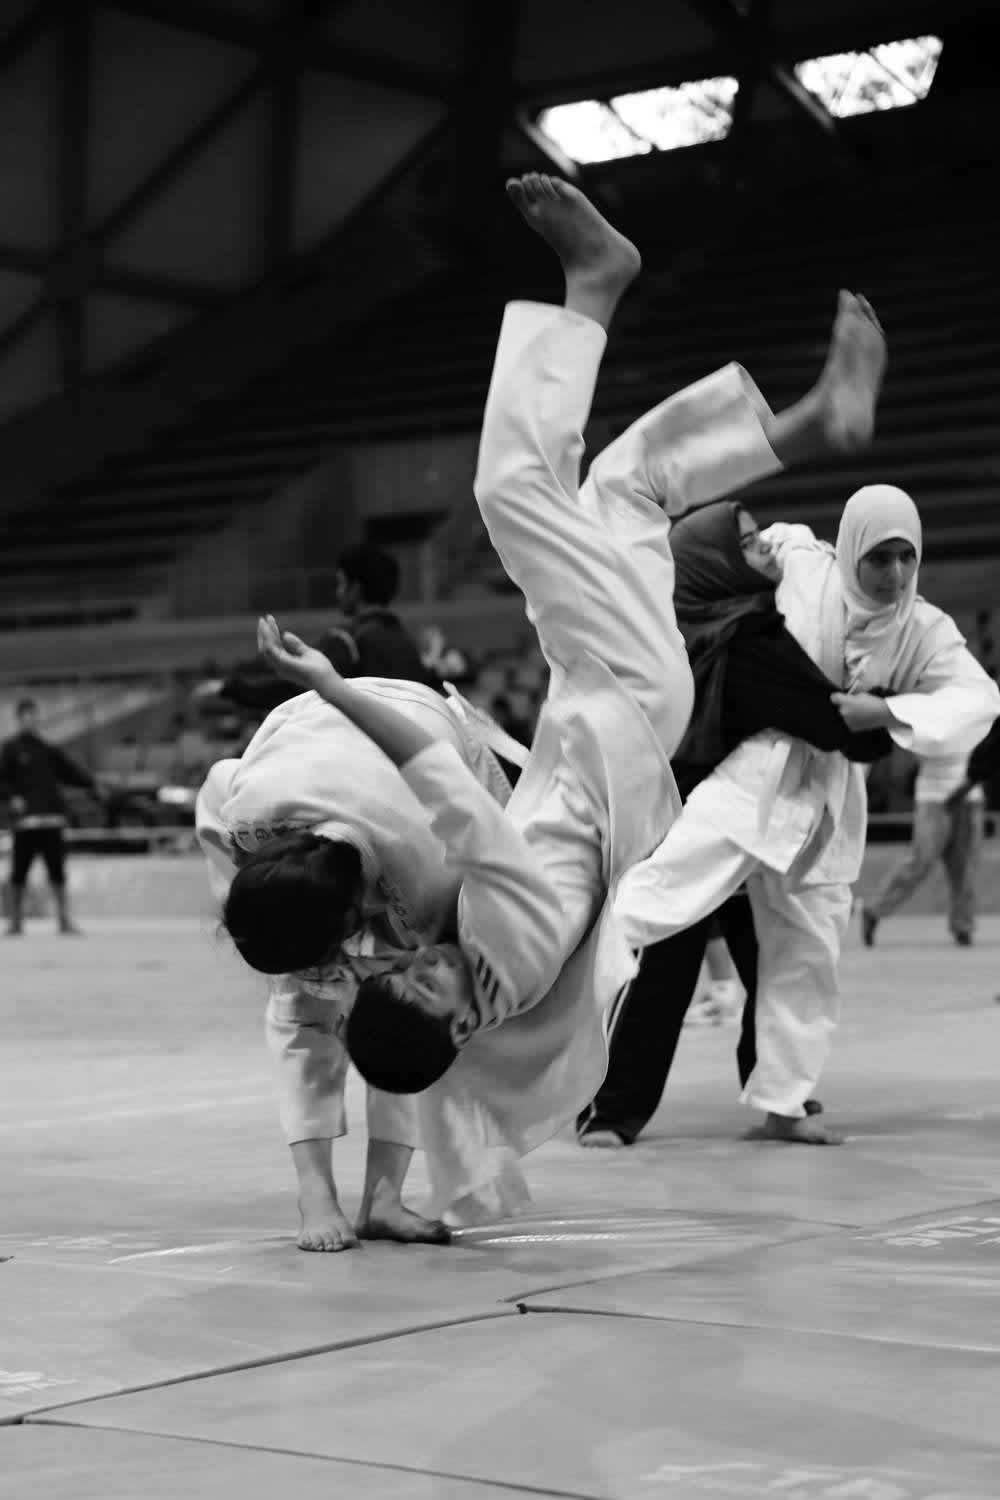 hijabs and judo throws 09